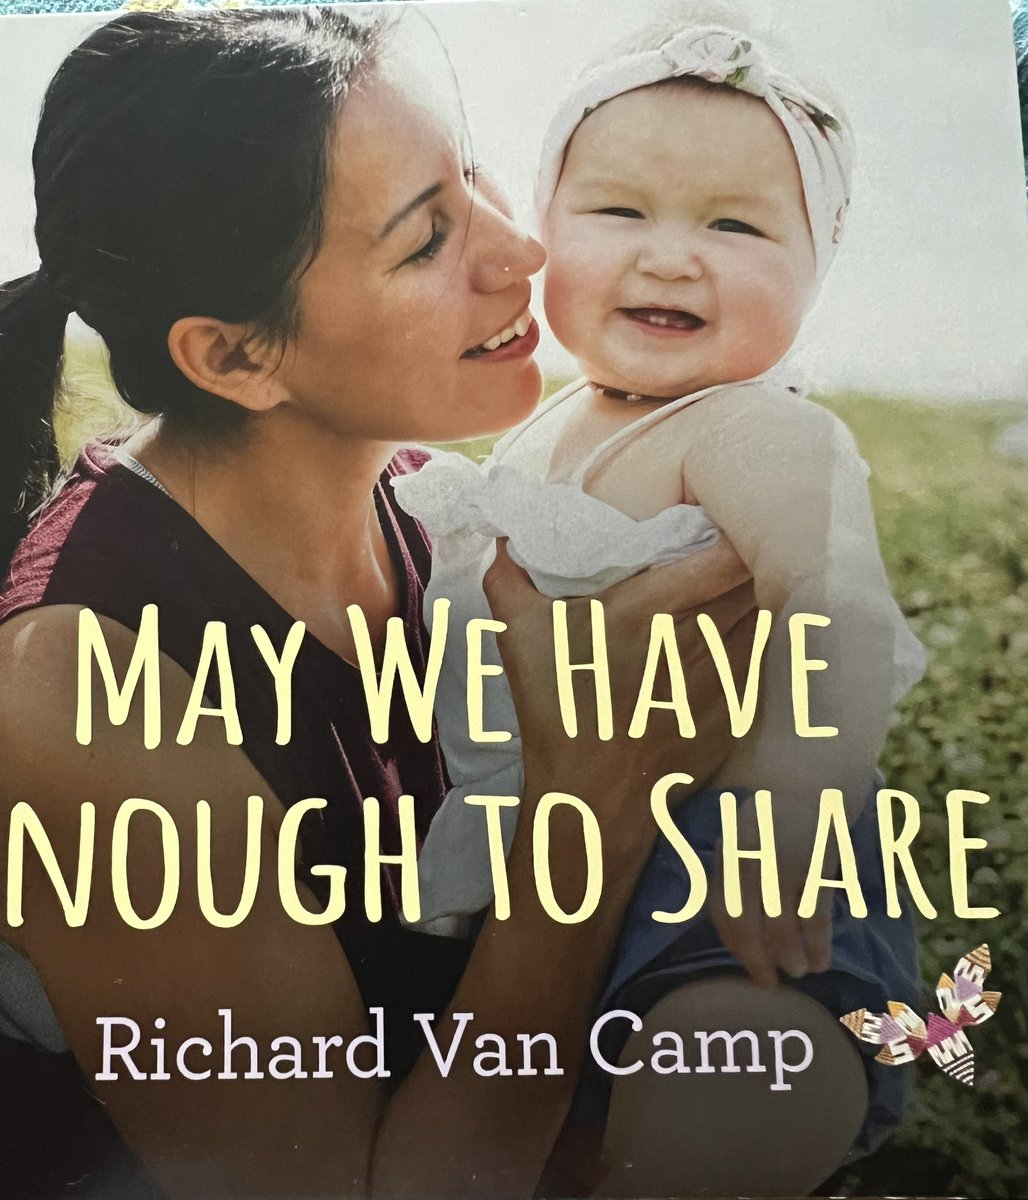 Packing up a gift basket for our newest family member & their parents🥰 Always include this book by @richardvancamp